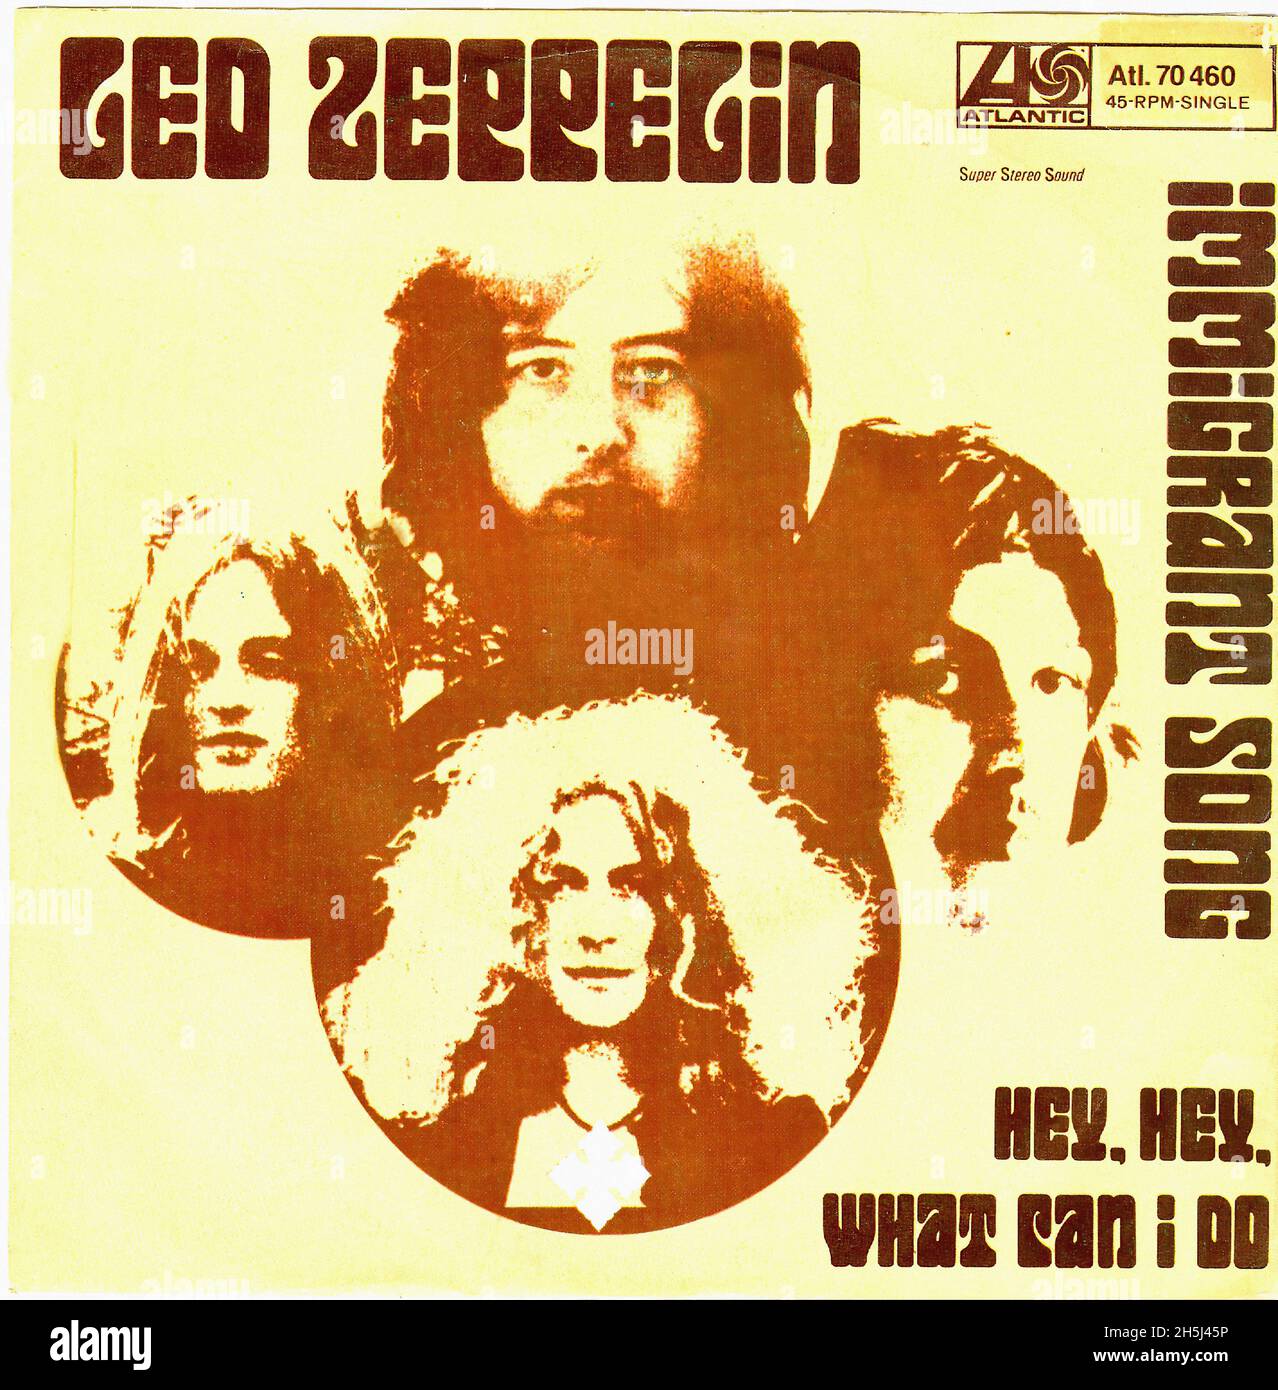 Vintage single record cover - Led Zeppelin - Immigrant Song - D - 1970  Stock Photo - Alamy